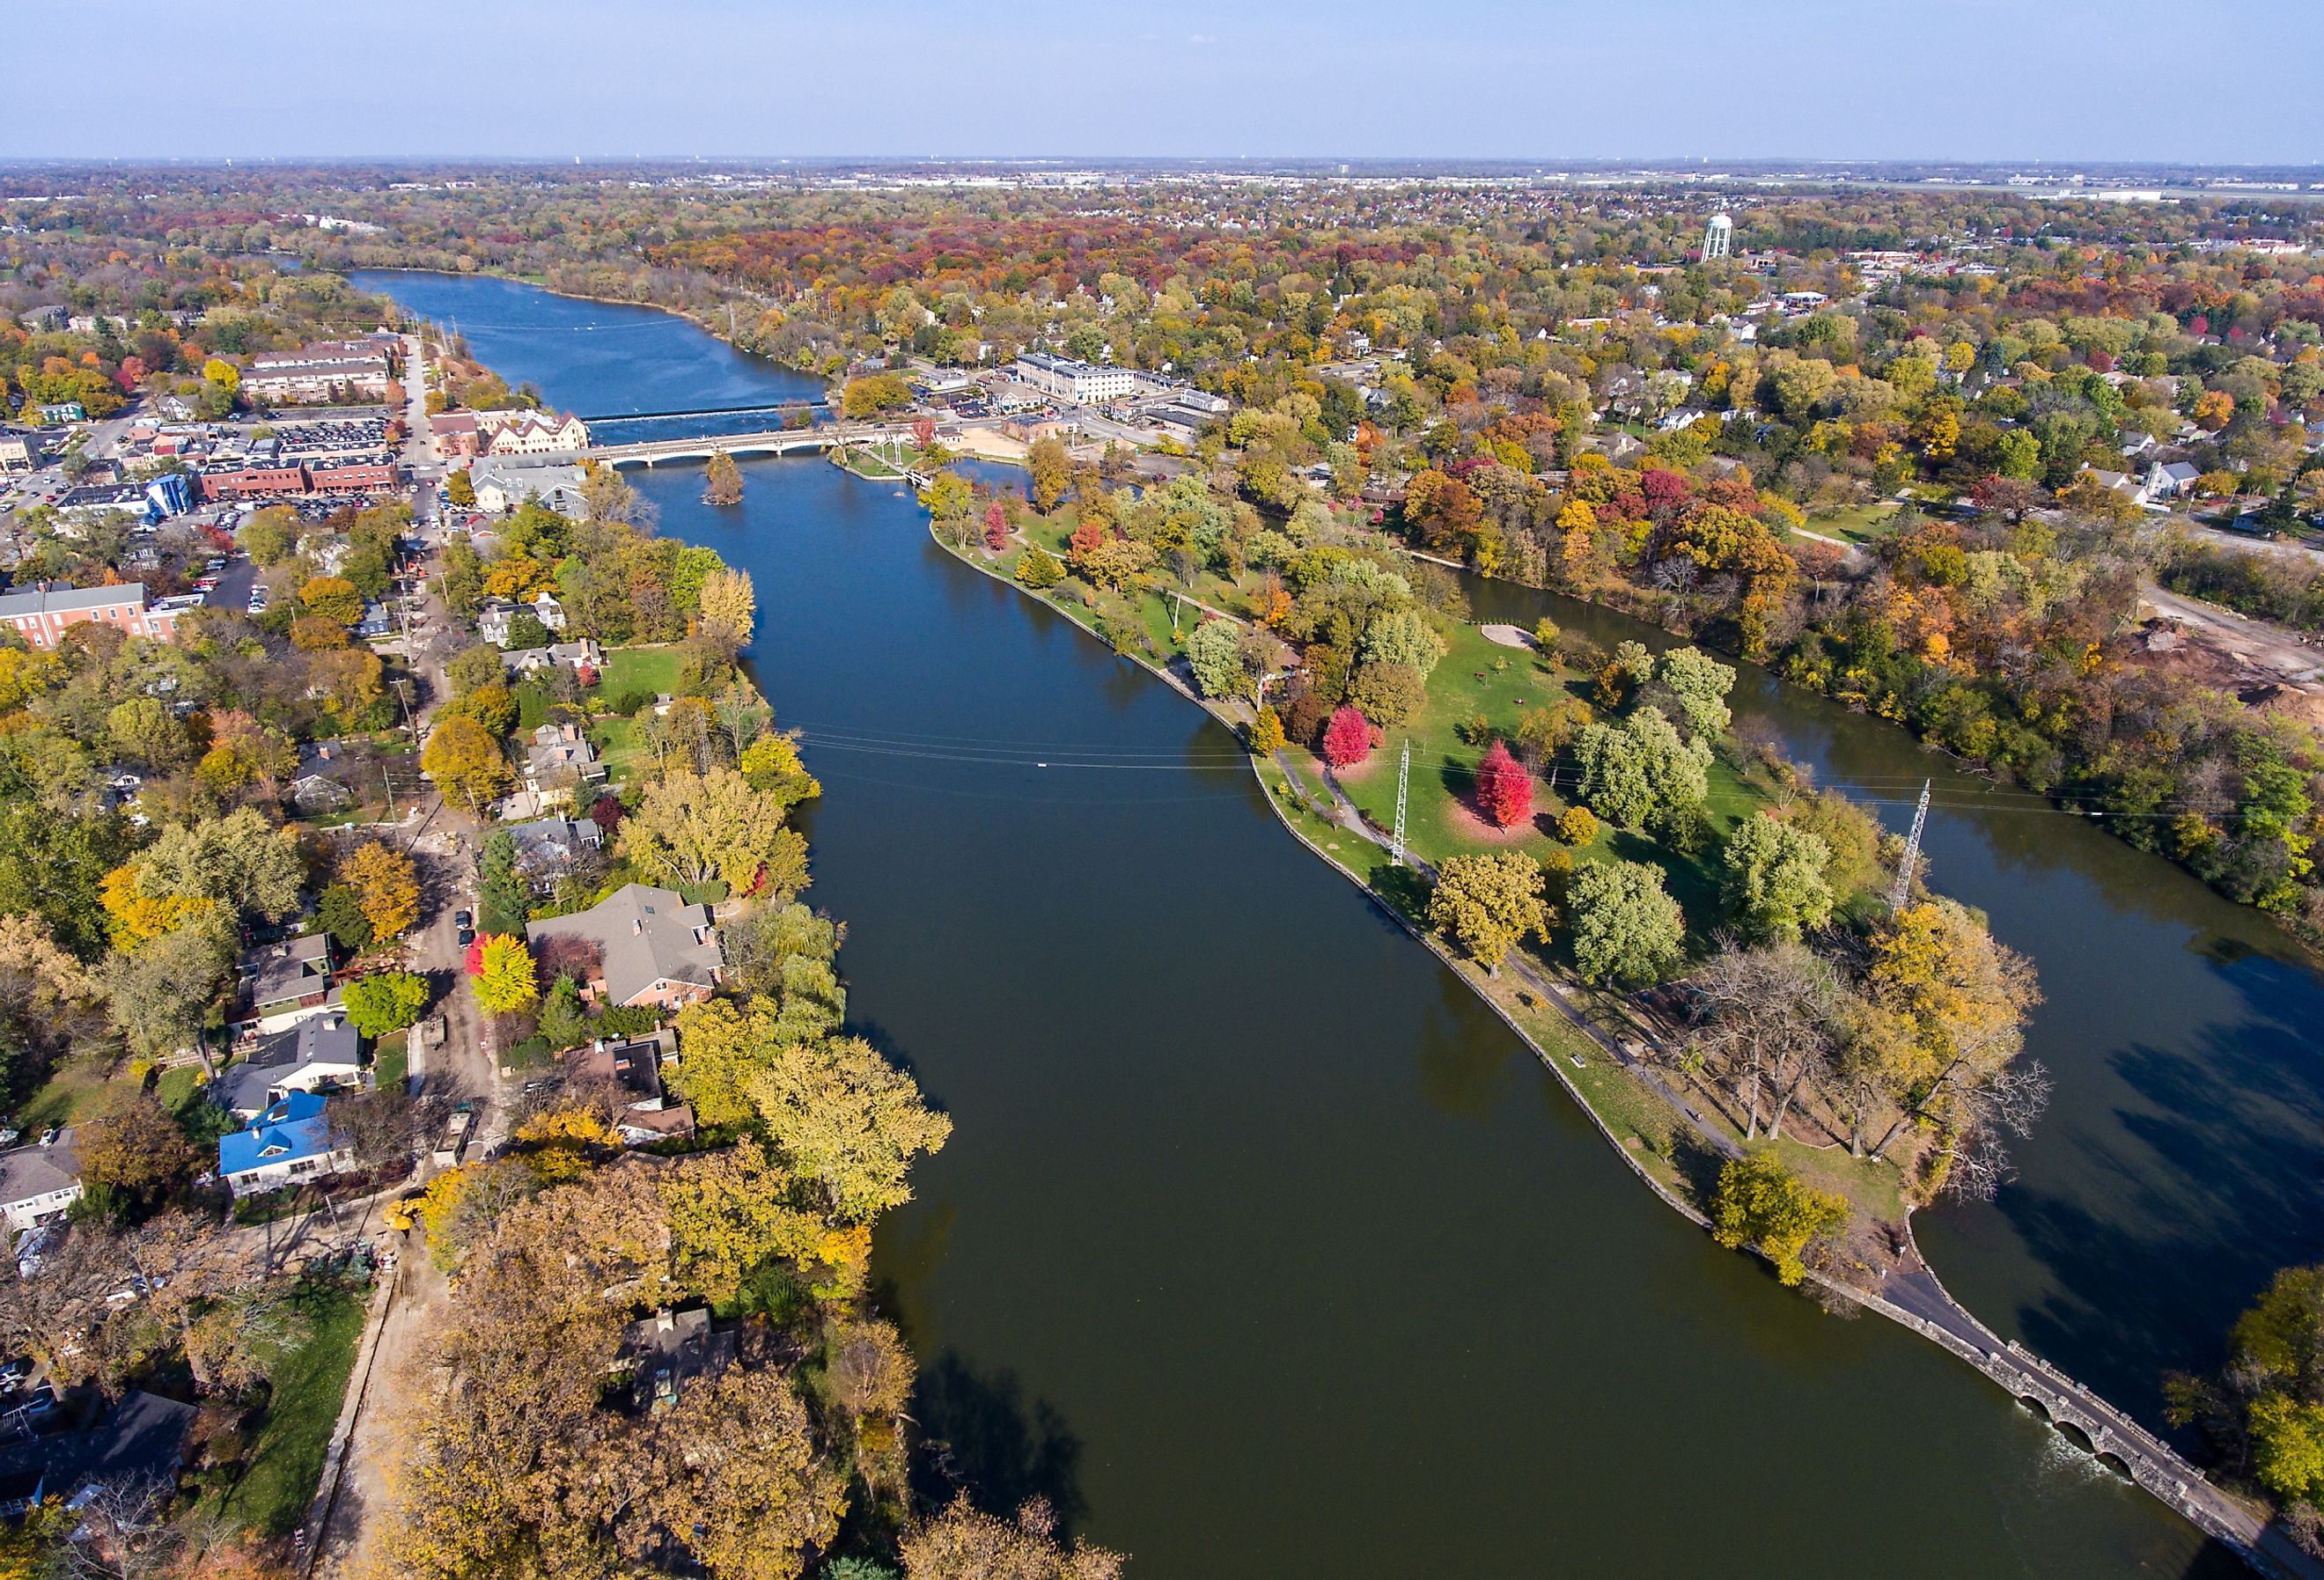 North aerial view of fall foliage and river over Island Park in Geneva, Illinois.